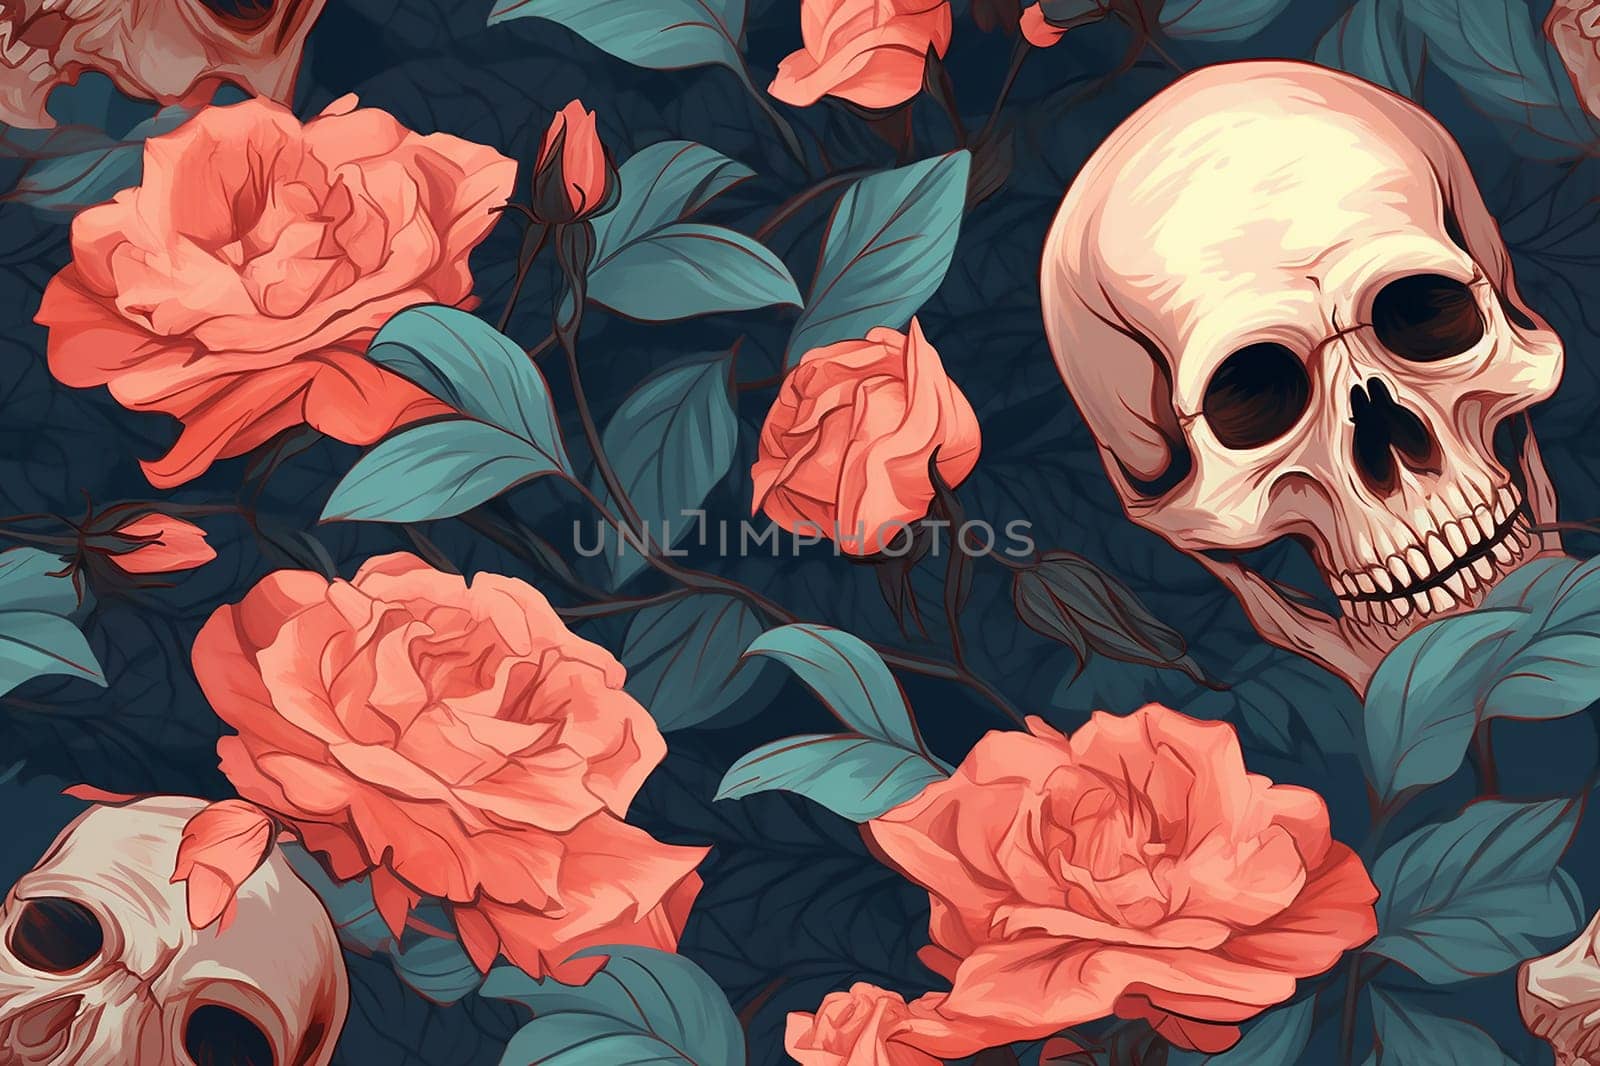 Gothic Floral pattern with blooming Roses and Skull by Hype2art